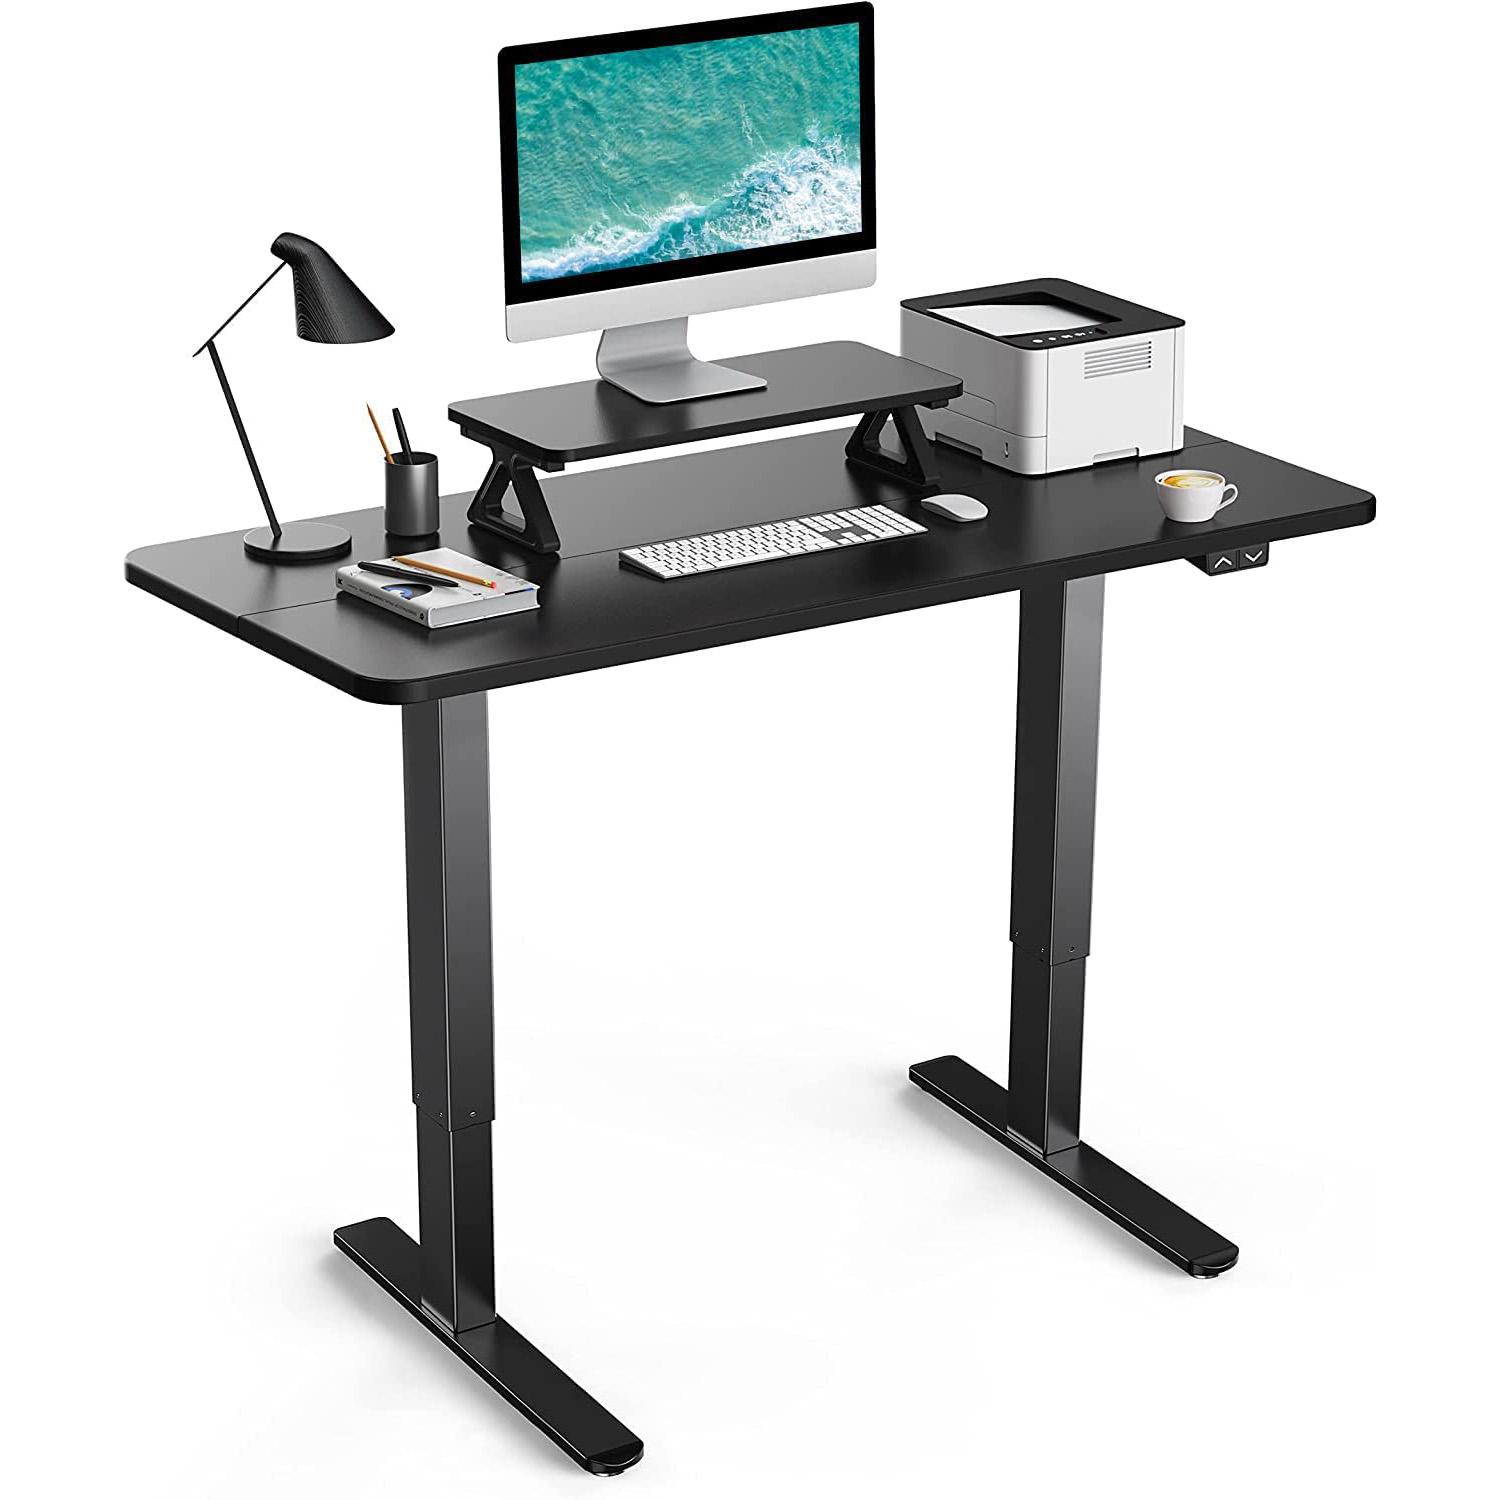 Totnz Electric Standing Desk Height Adjustable Table for $189.99 Shipped